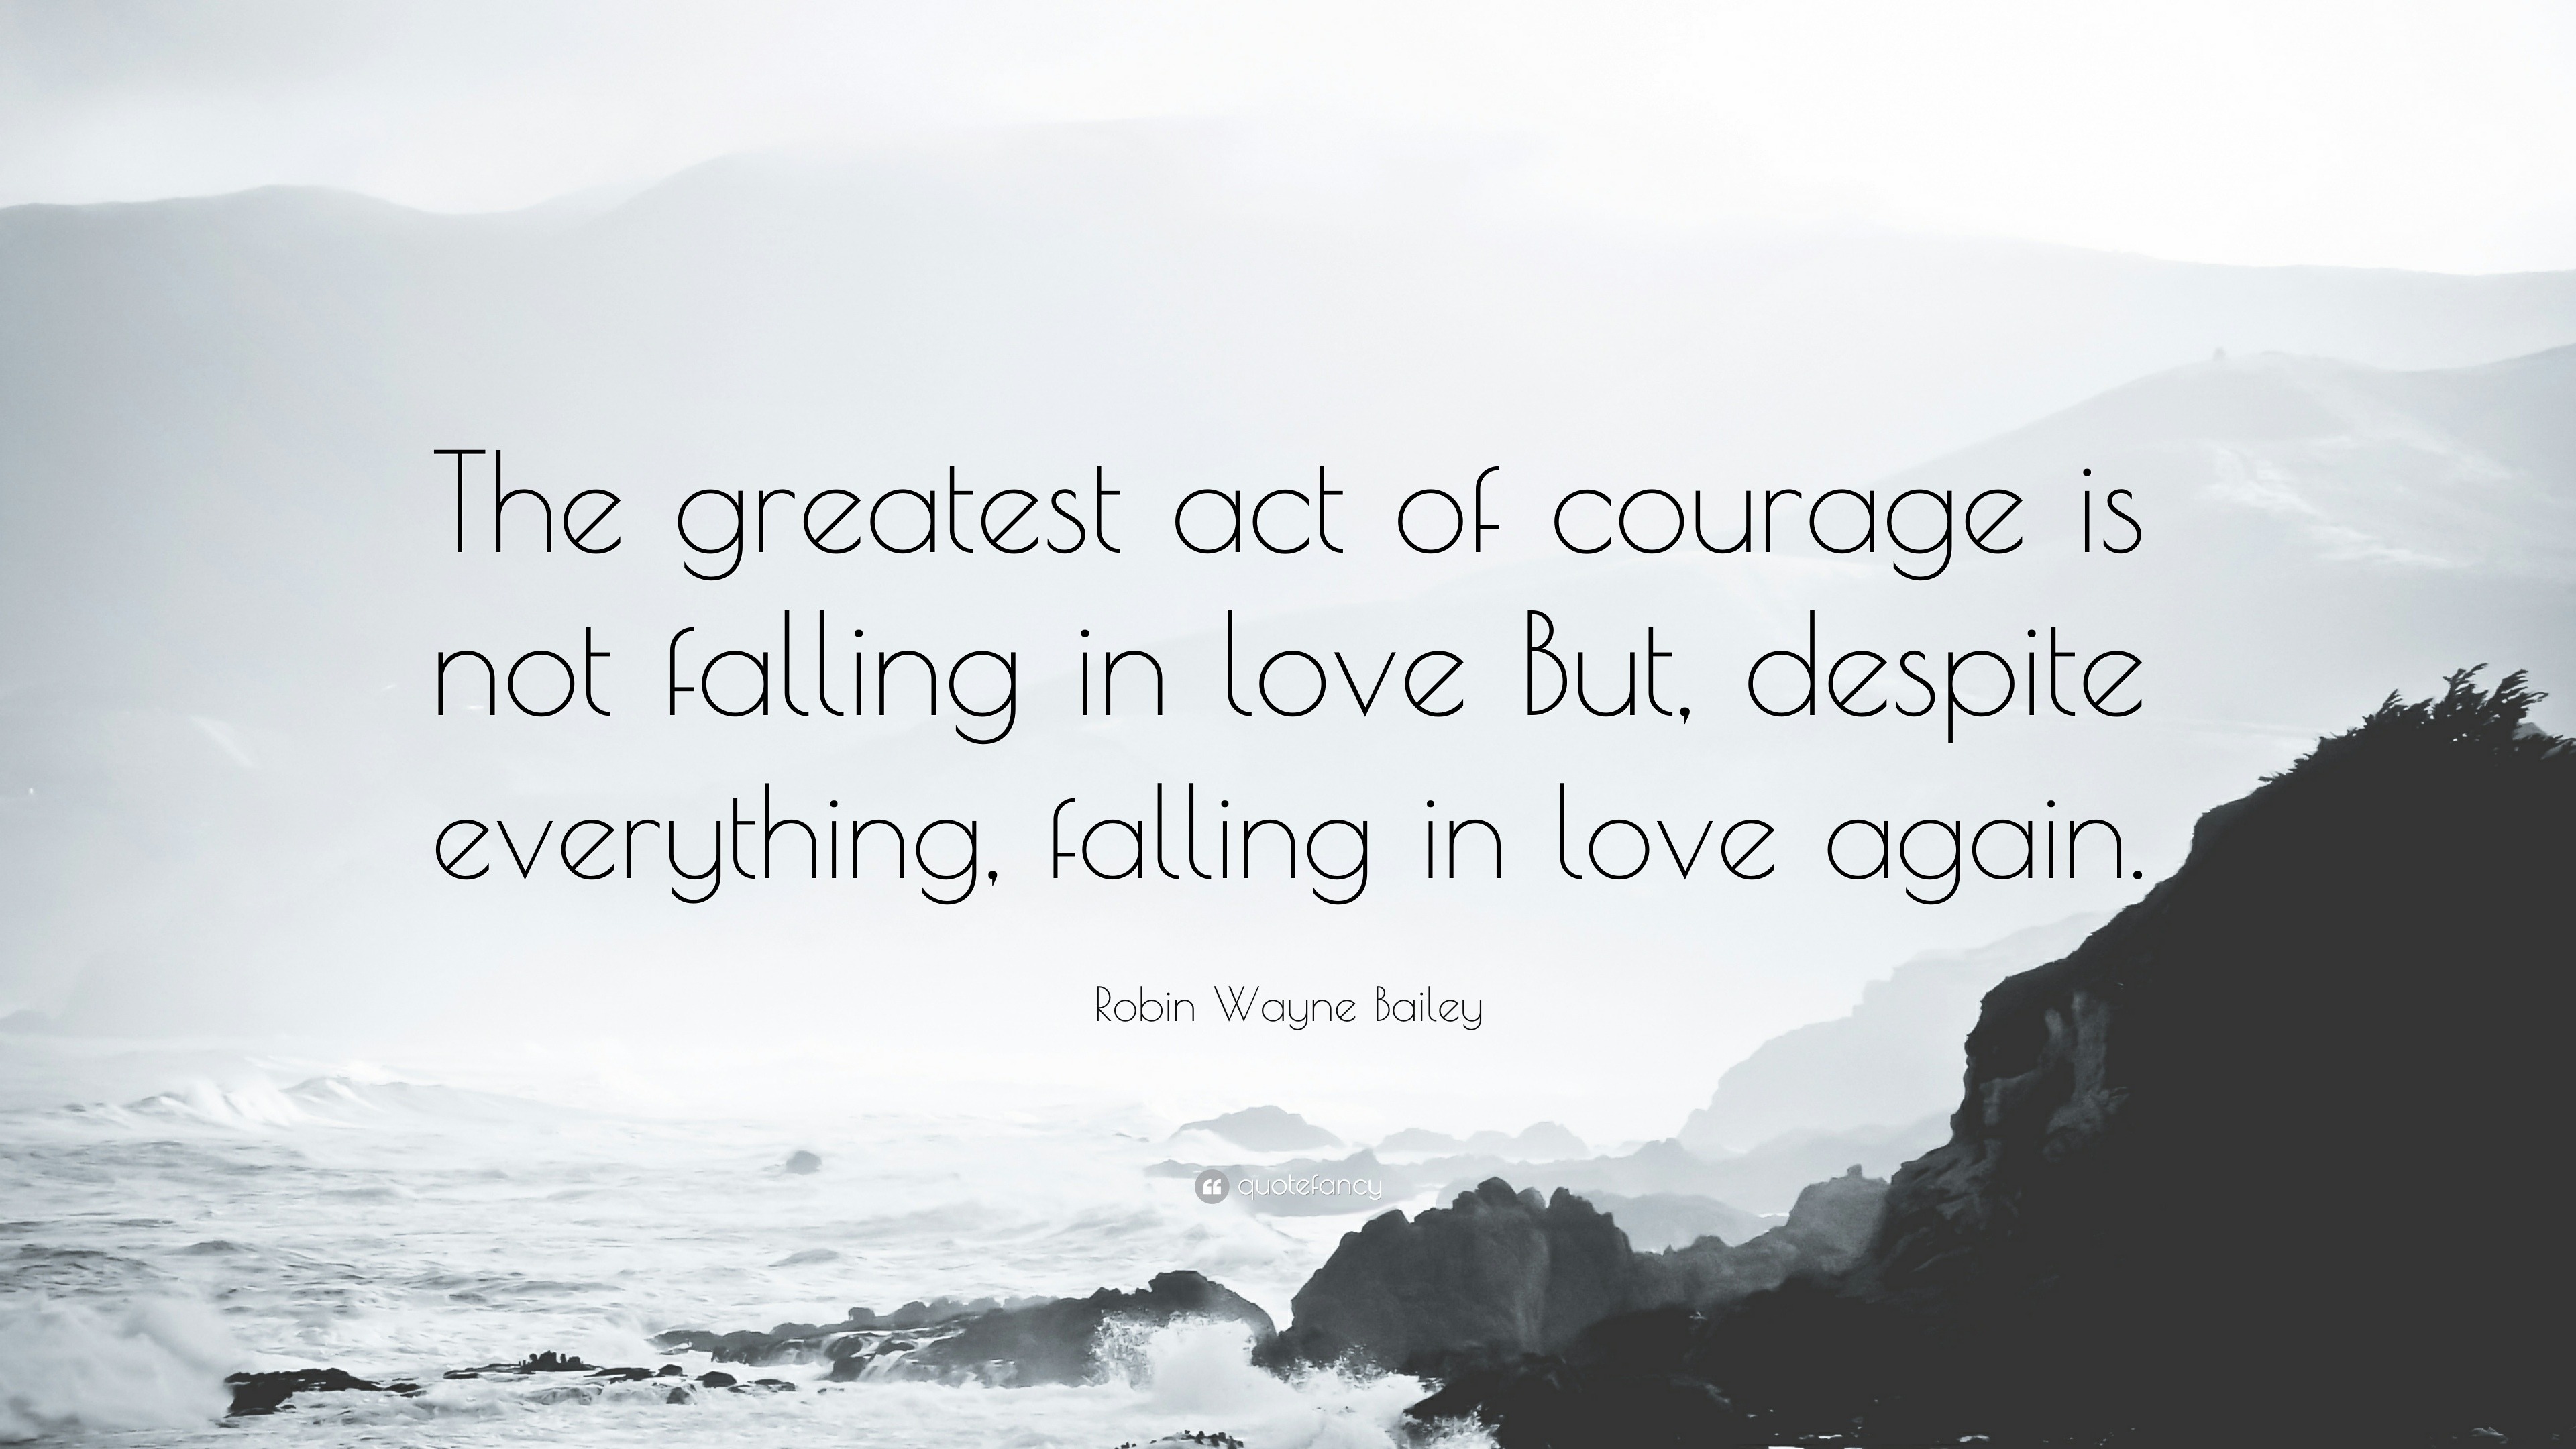 Robin Wayne Bailey Quote “The greatest act of courage is not falling in love